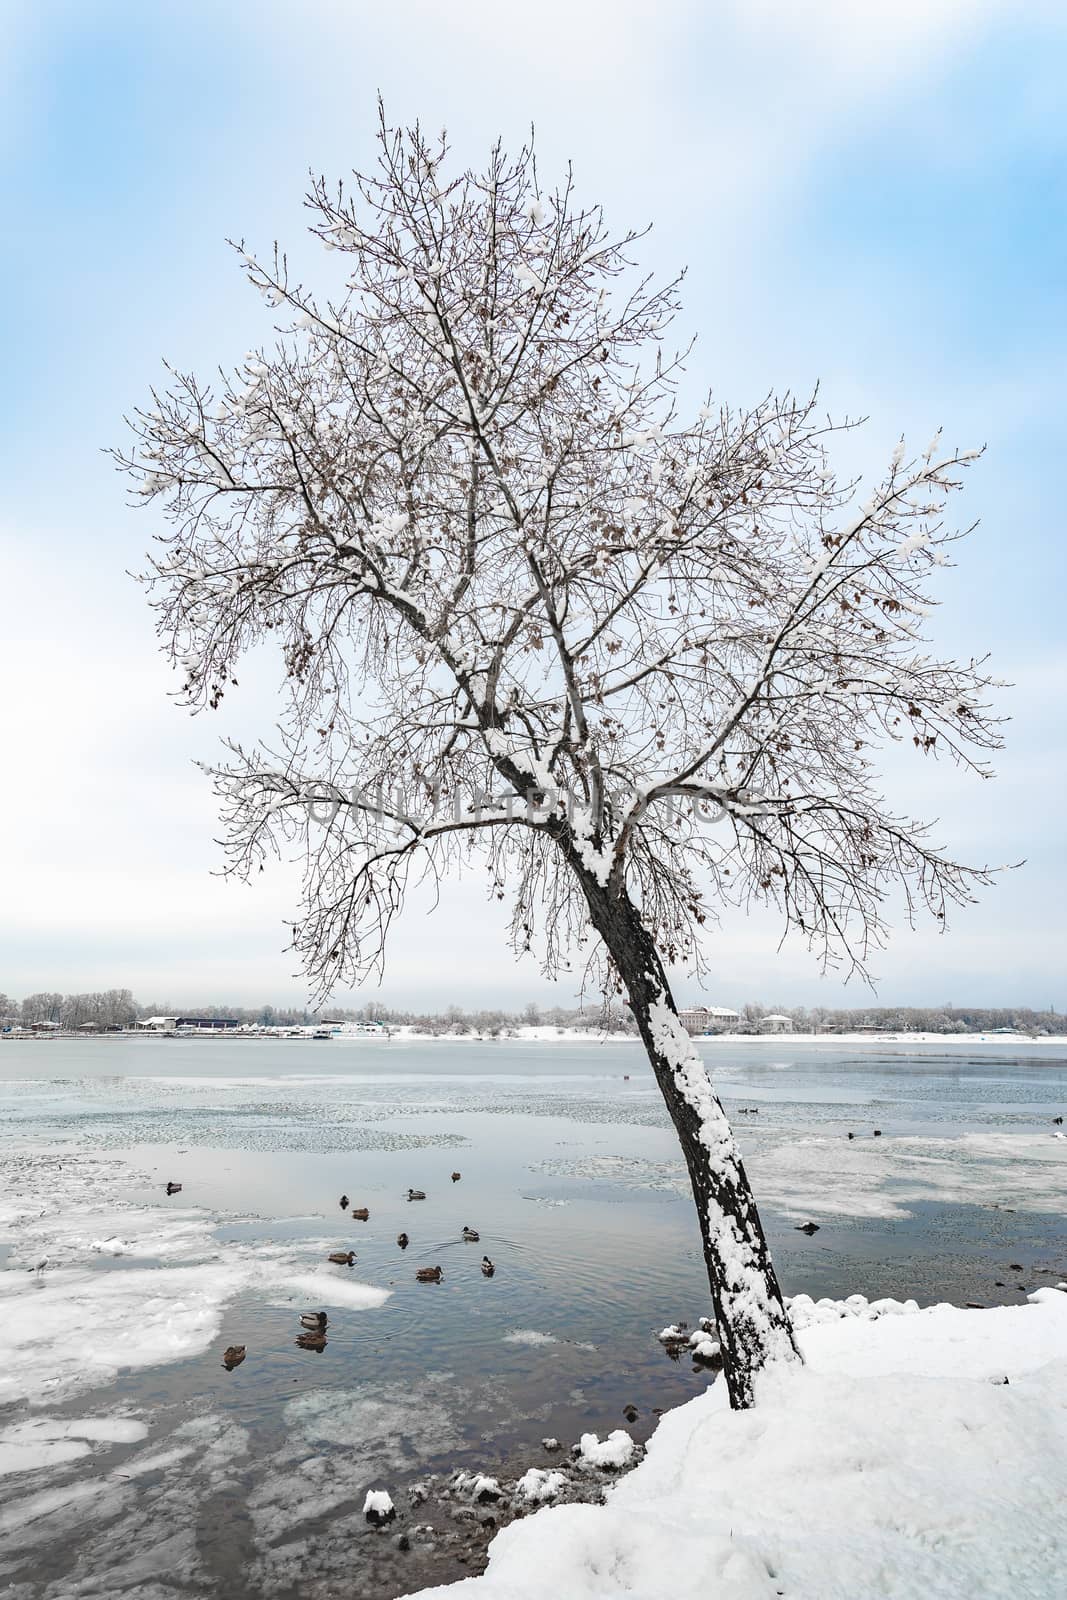 A poplar close to the Dnieper river in Kiev, Ukraine, stands out against a background of white snowy winter sky. Ducks are swimming on the icy water